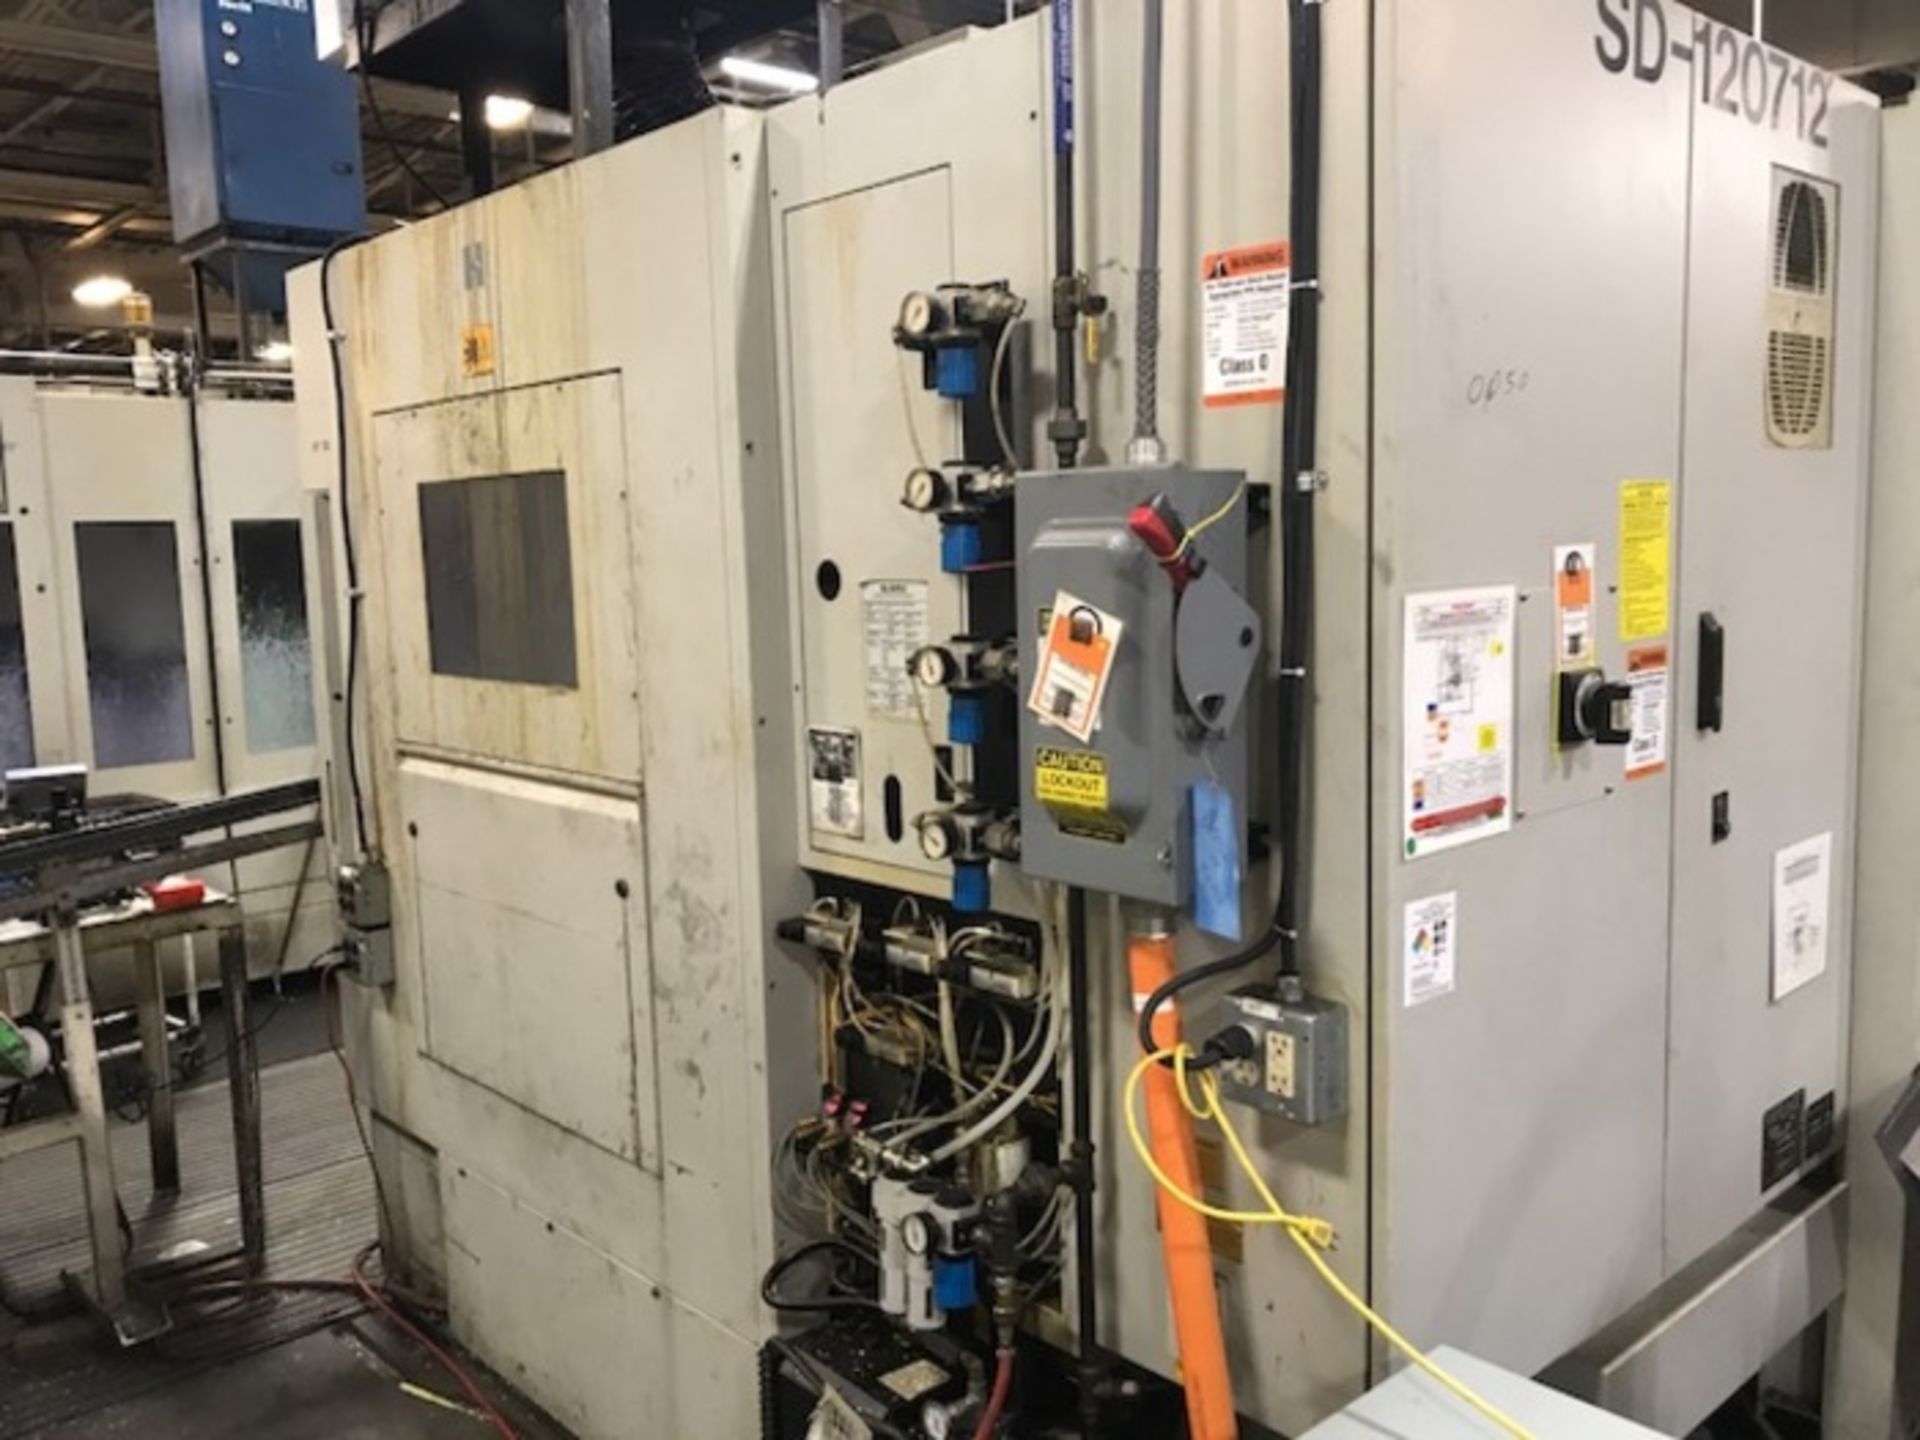 HARDINGE XR760 VMC PRODUCTION CENTER 30"X24"X24" W/4TH AXIS TRUNION, YEAR 2010, SN XRAB0A0001 - Image 2 of 14